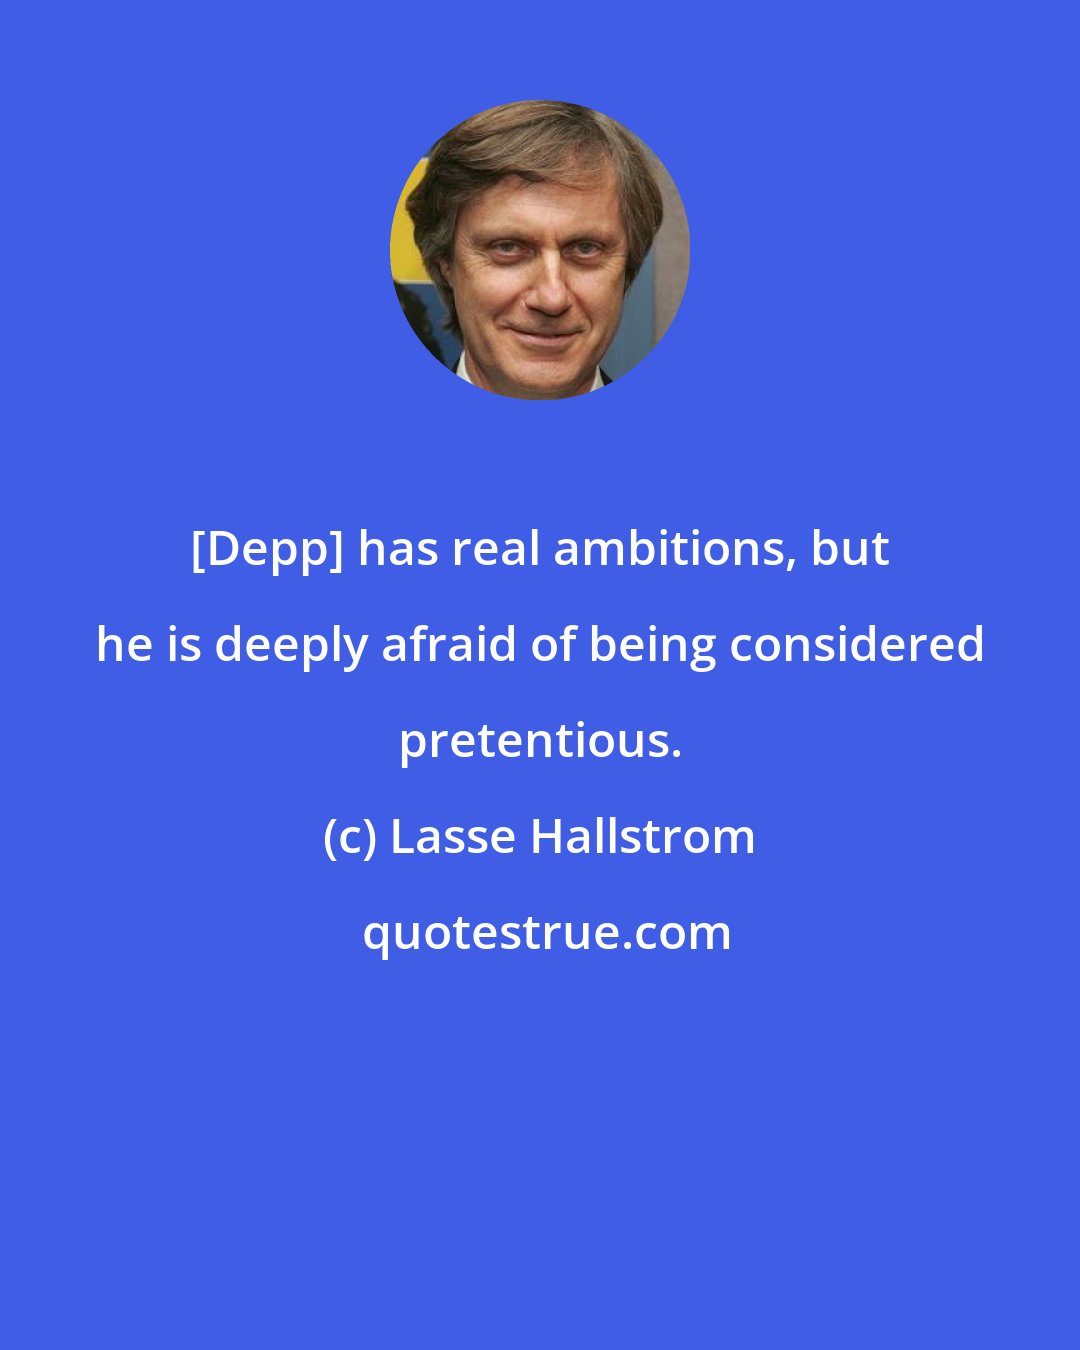 Lasse Hallstrom: [Depp] has real ambitions, but he is deeply afraid of being considered pretentious.